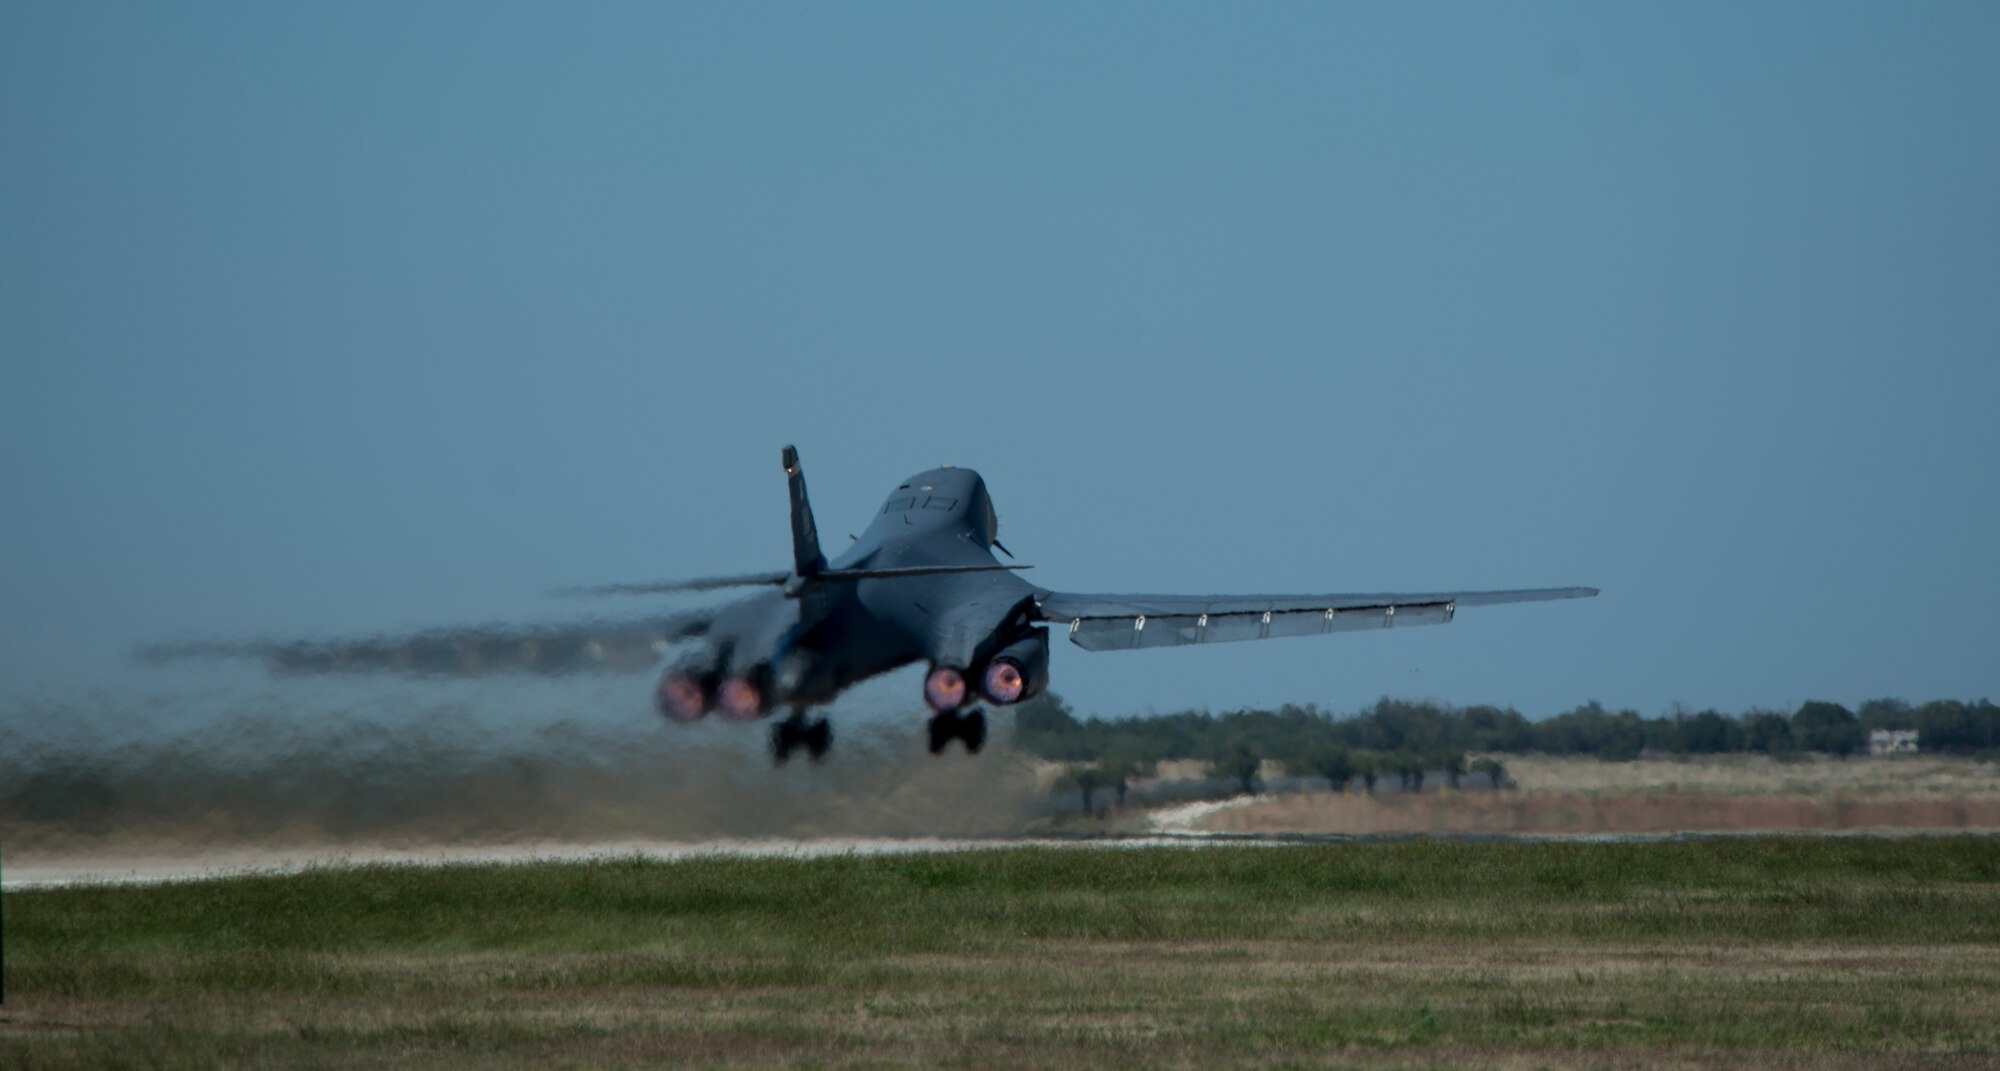 A U.S. Air Force B-1B Lancer takes off Oct. 2, 2014, at Dyess Air Force Base, Texas. The B-1B is currently undergoing its largest upgrade in the aircraft’s history. The Sustainment-Block 16 upgrade has increased the survivability of the B-1 Bomber by eliminating many of the aircrew’s out-dated systems and procedures. Additionally, it has provided a gateway for future upgrades to the aircraft. (U.S. Air Force photo by Senior Airman Peter Thompson/Released)